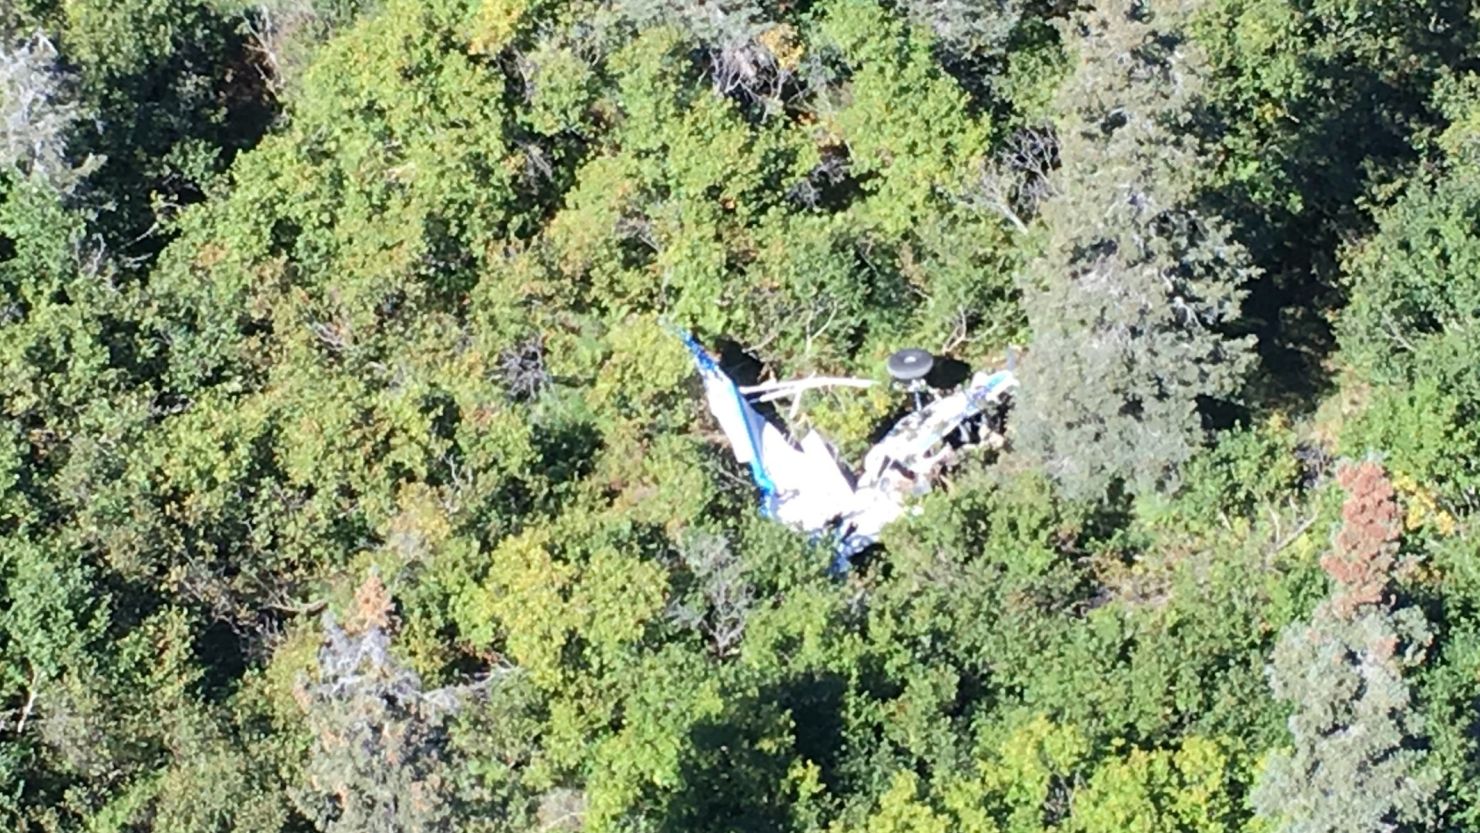 Five people were killed when two small airplanes collided  Wednesday over a remote section of Alaska, the Alaska State Troopers reported.